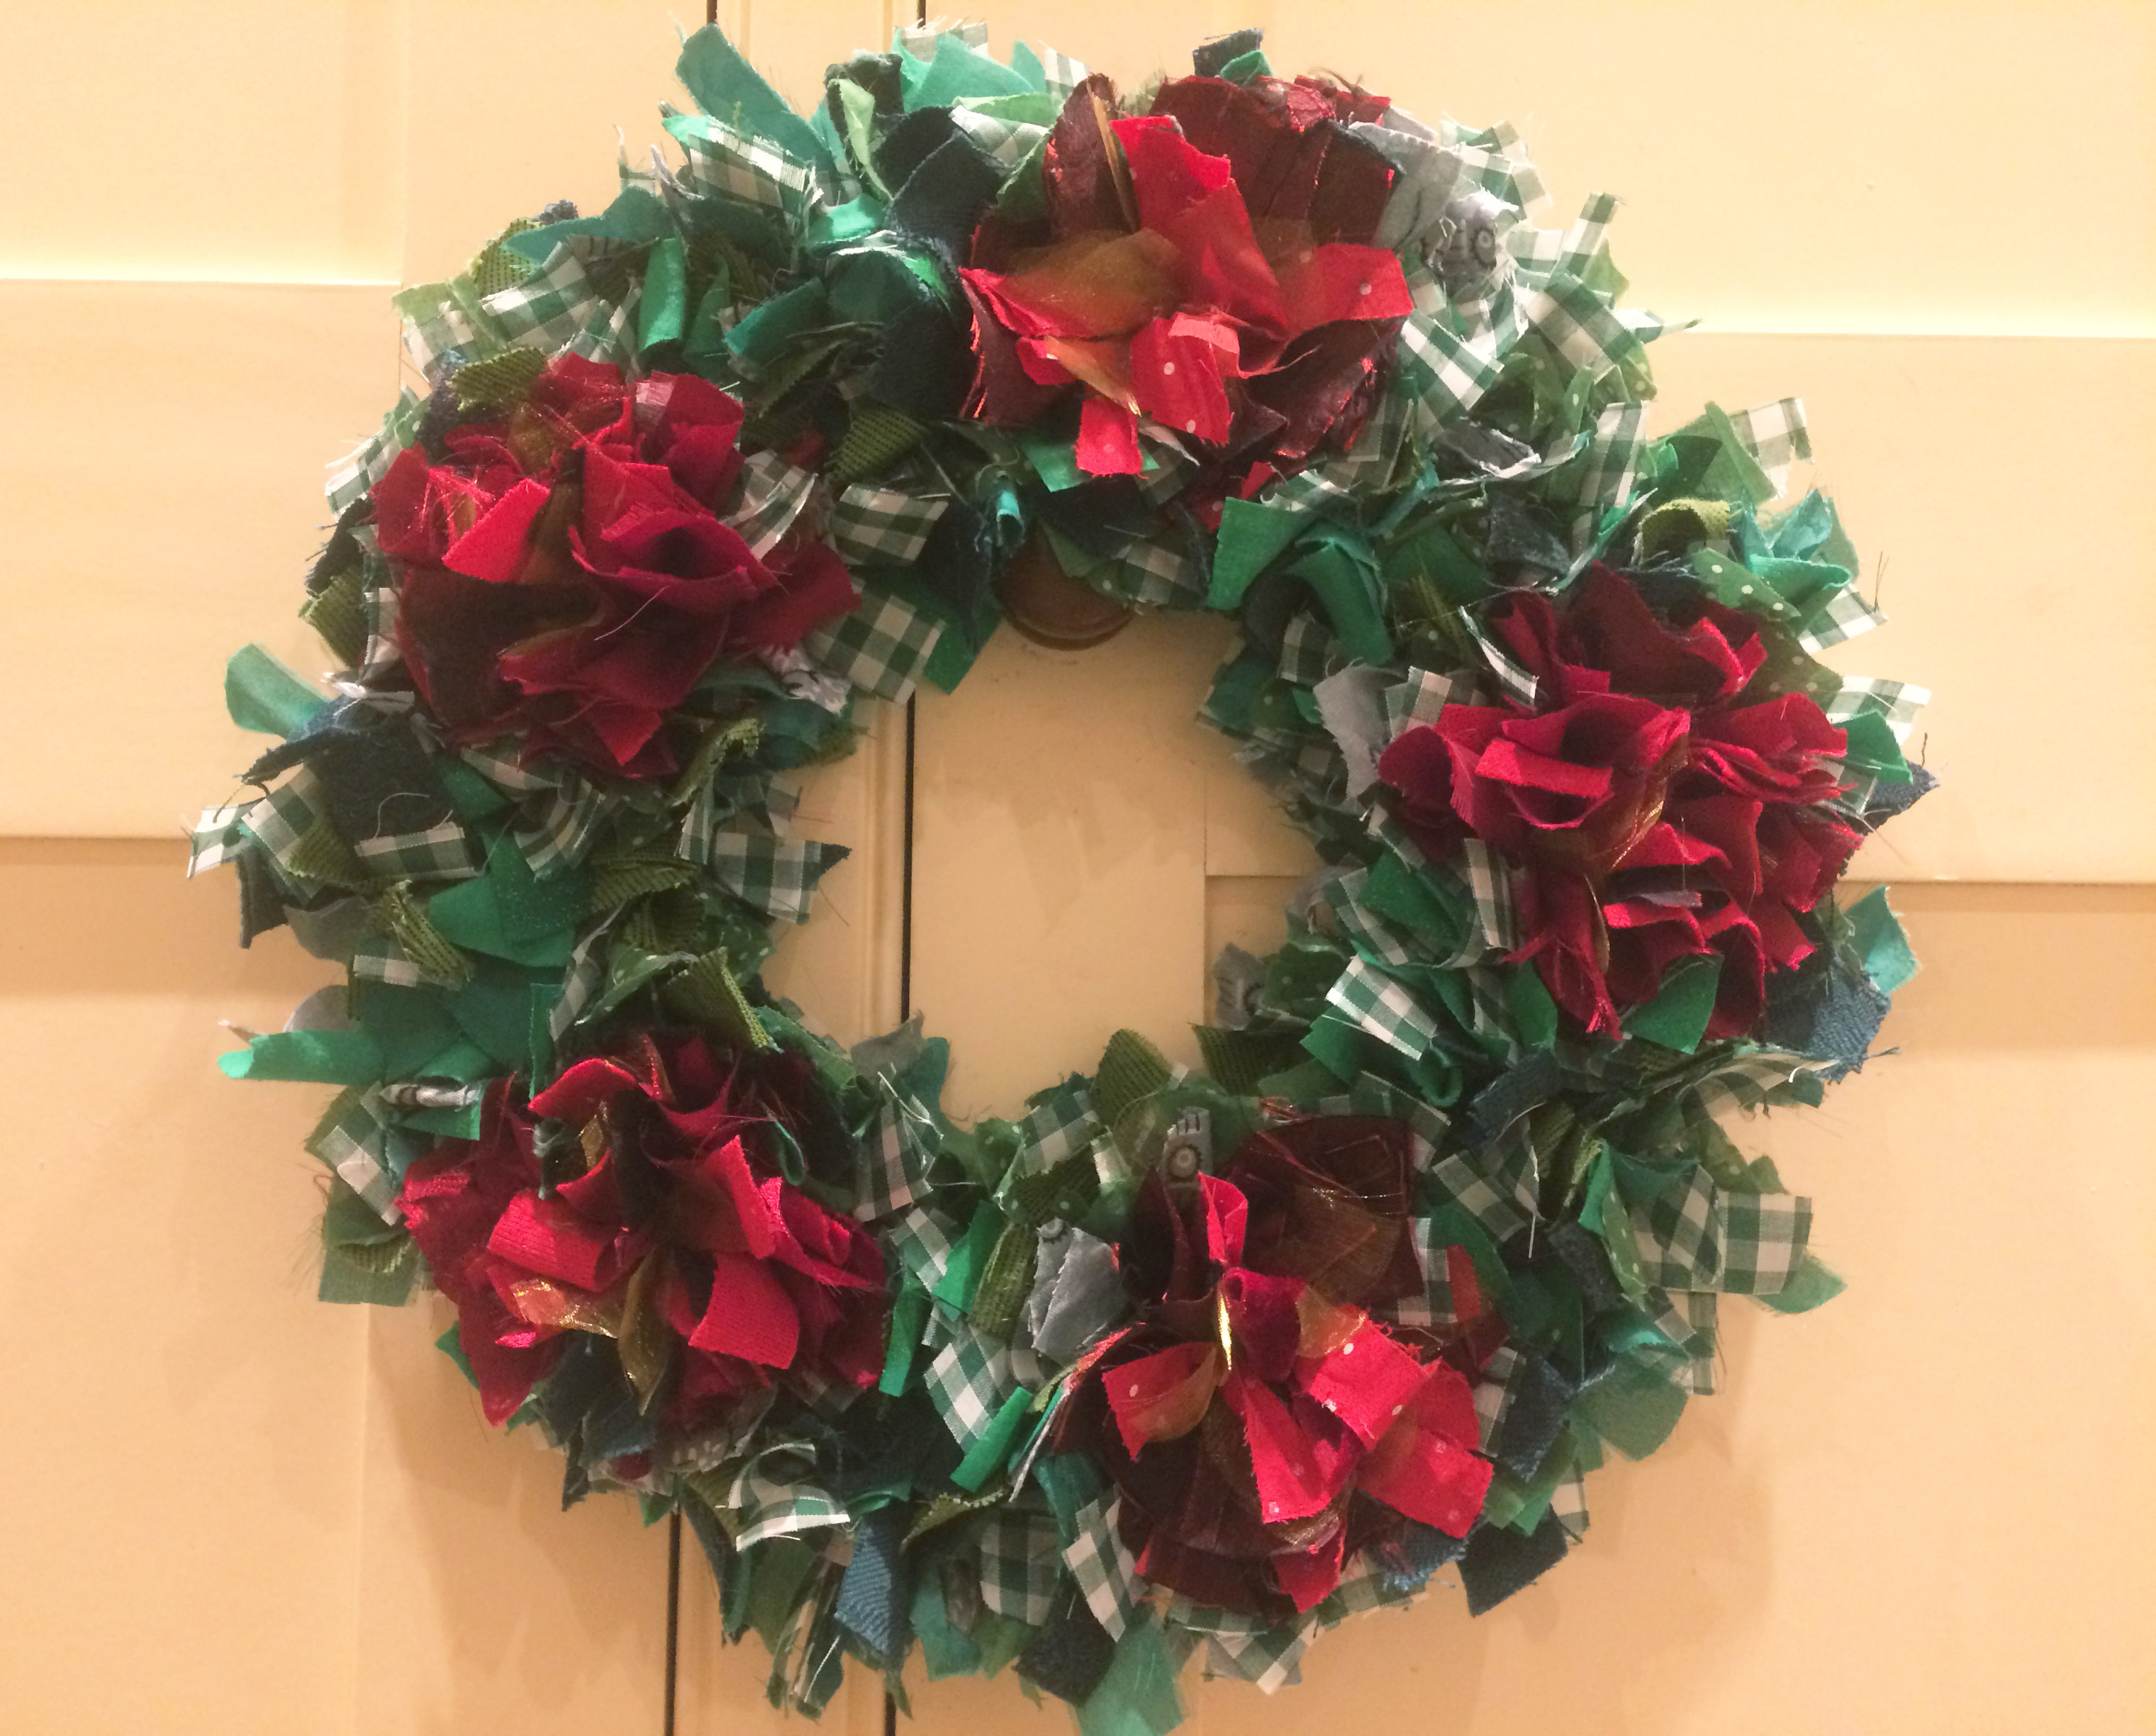 Traditional shaggy rag rug christmas wreath made using recycled materials by Cathy. 